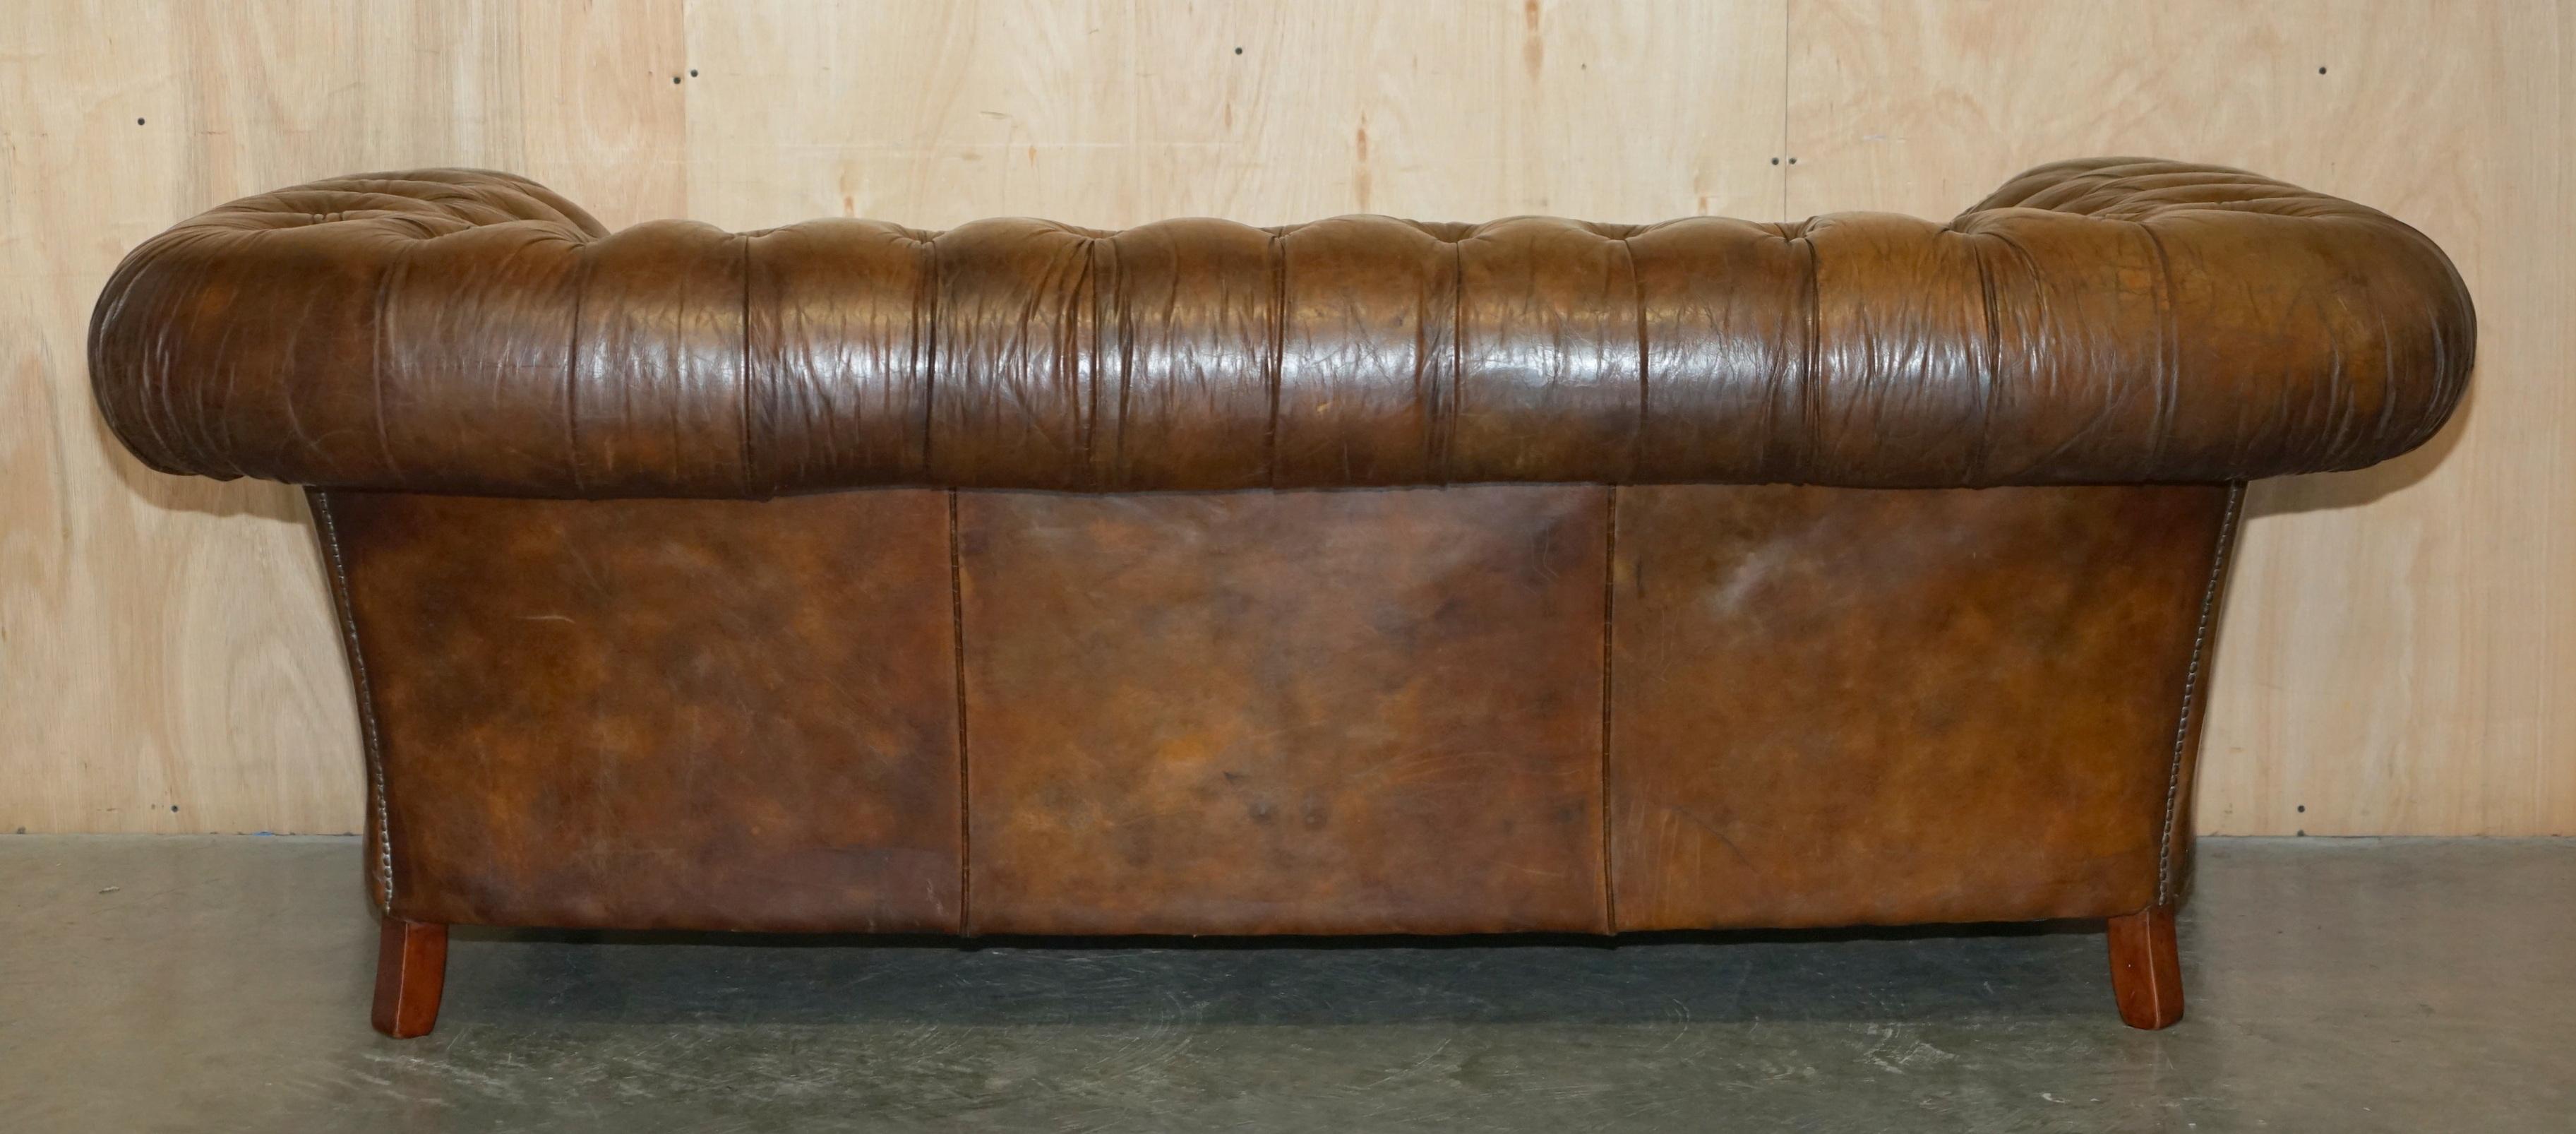 1 von 2 TIMOTHY OULTON HERITAGE BROWN OVERSIZED LEATHER CHESTERFIELD HALO SOFAs im Angebot 6